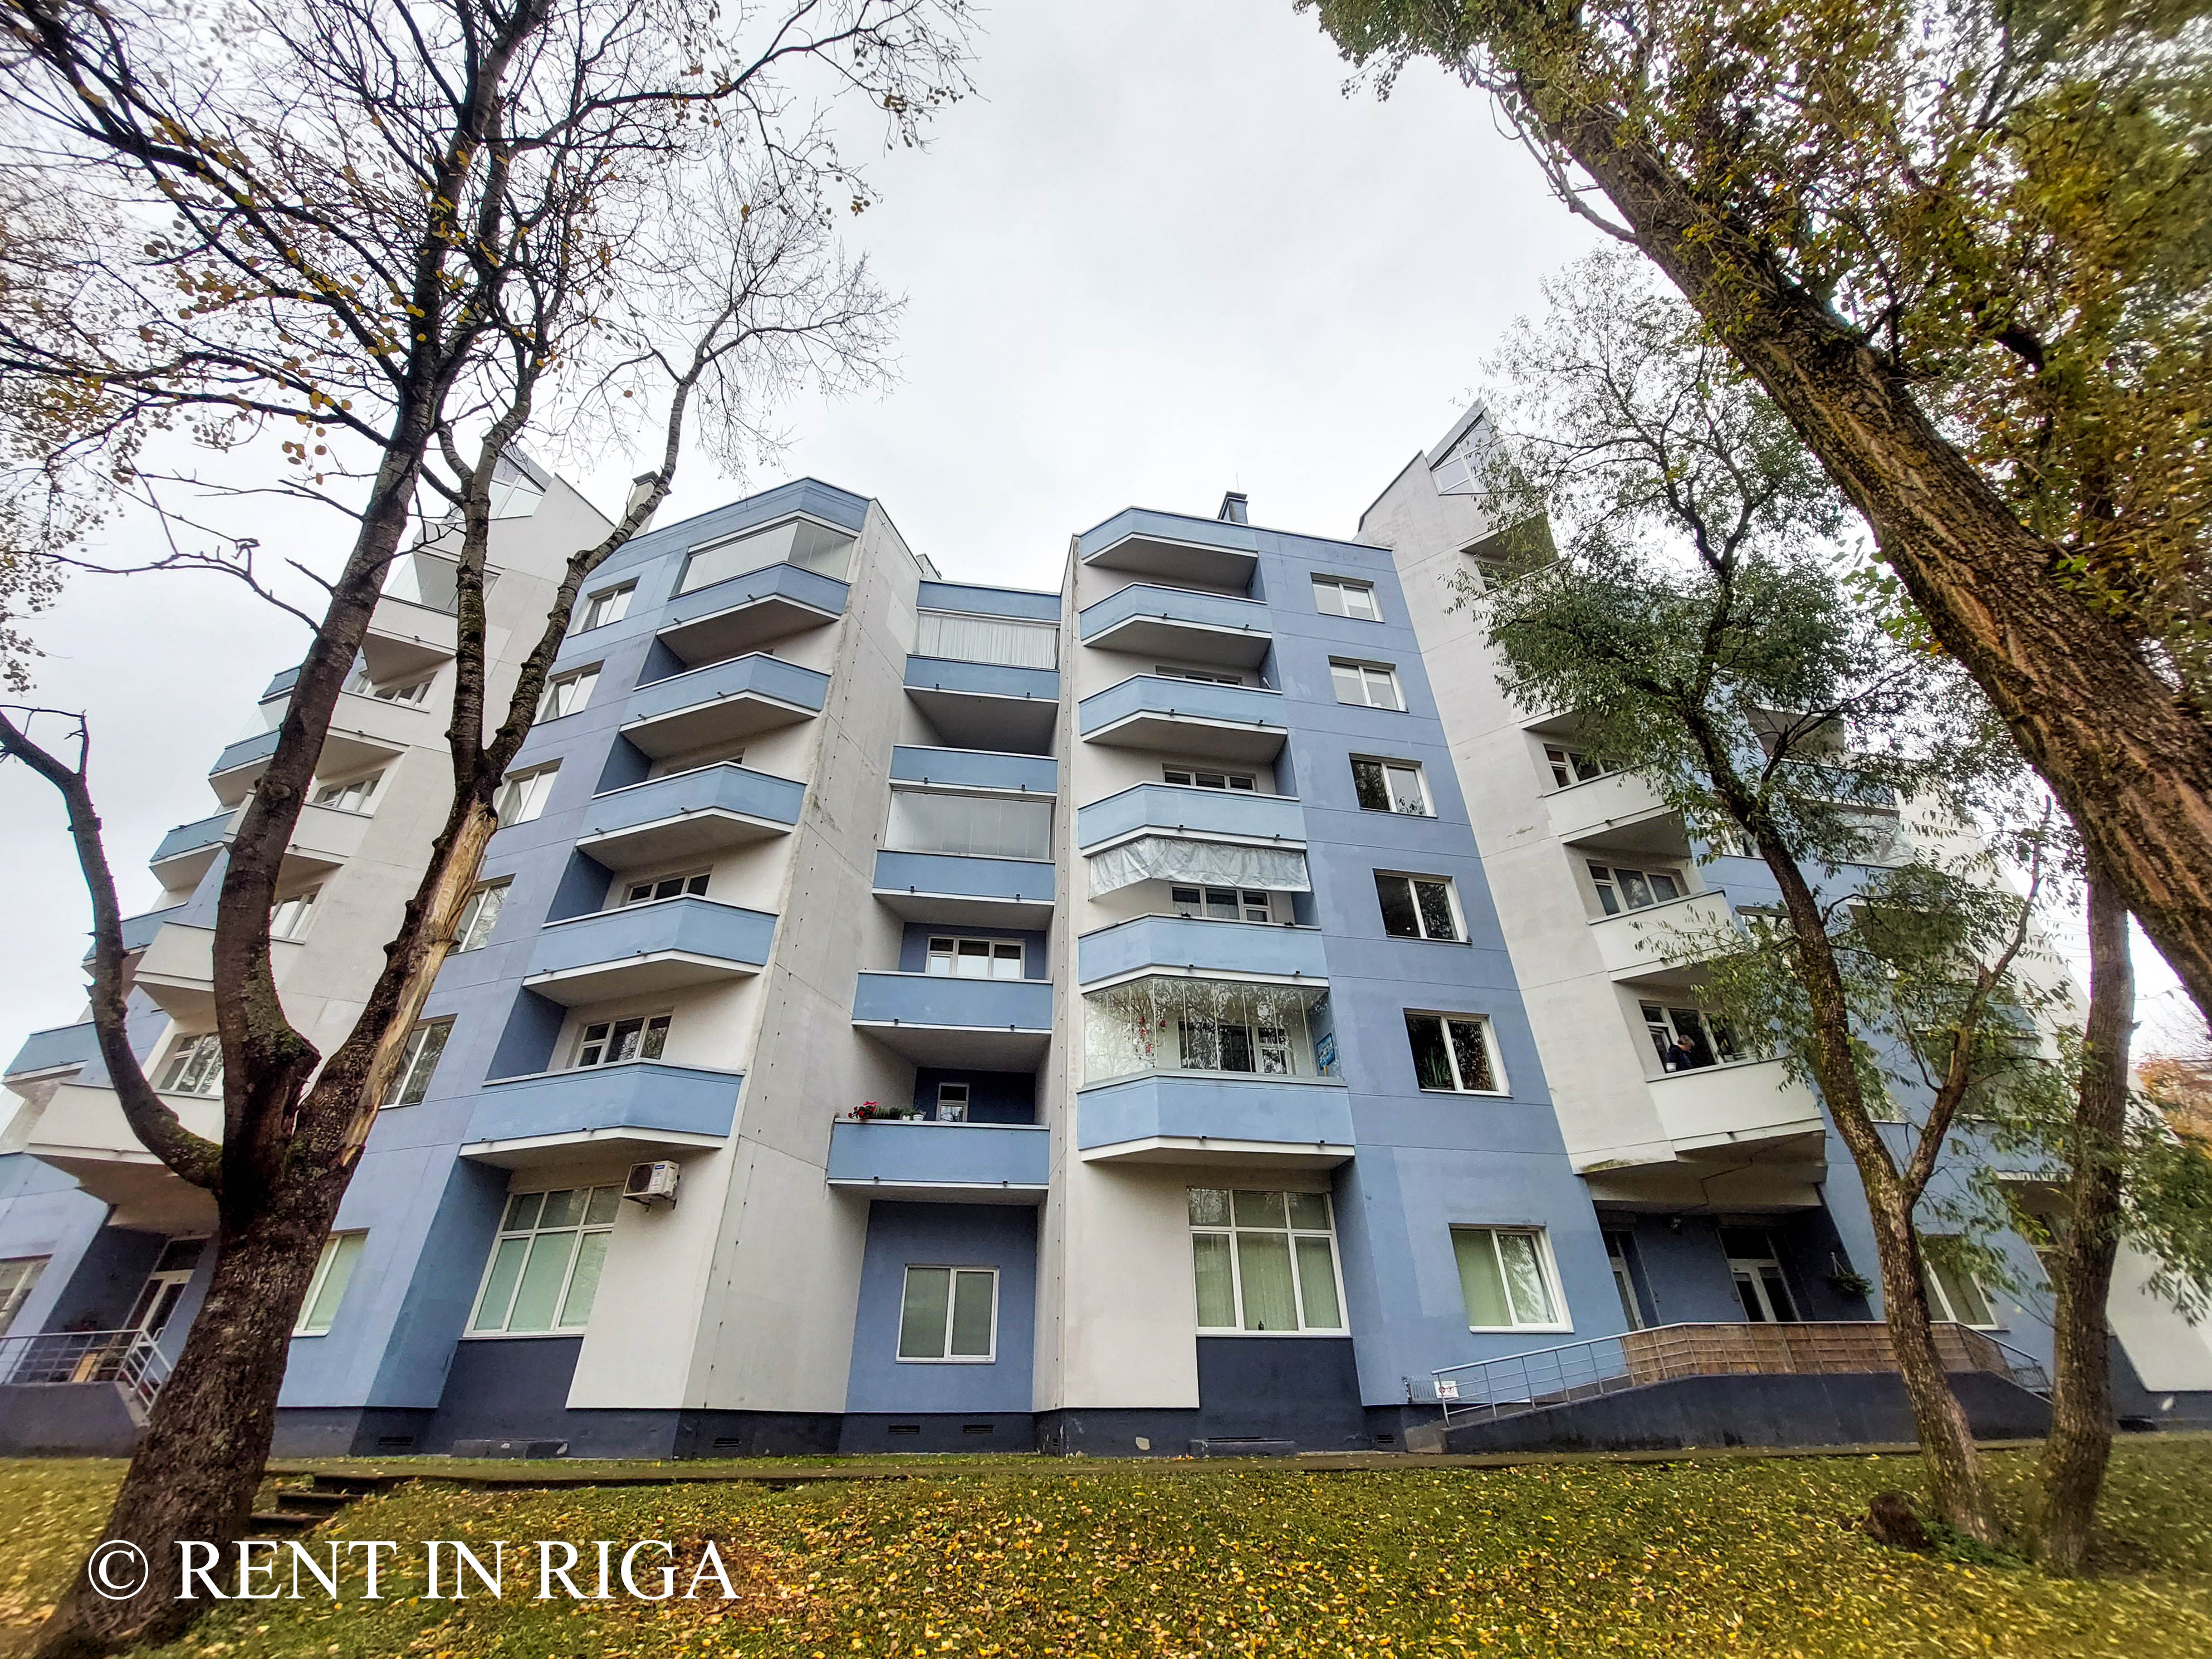 Apartment for rent, Stirnu street 13a - Image 1